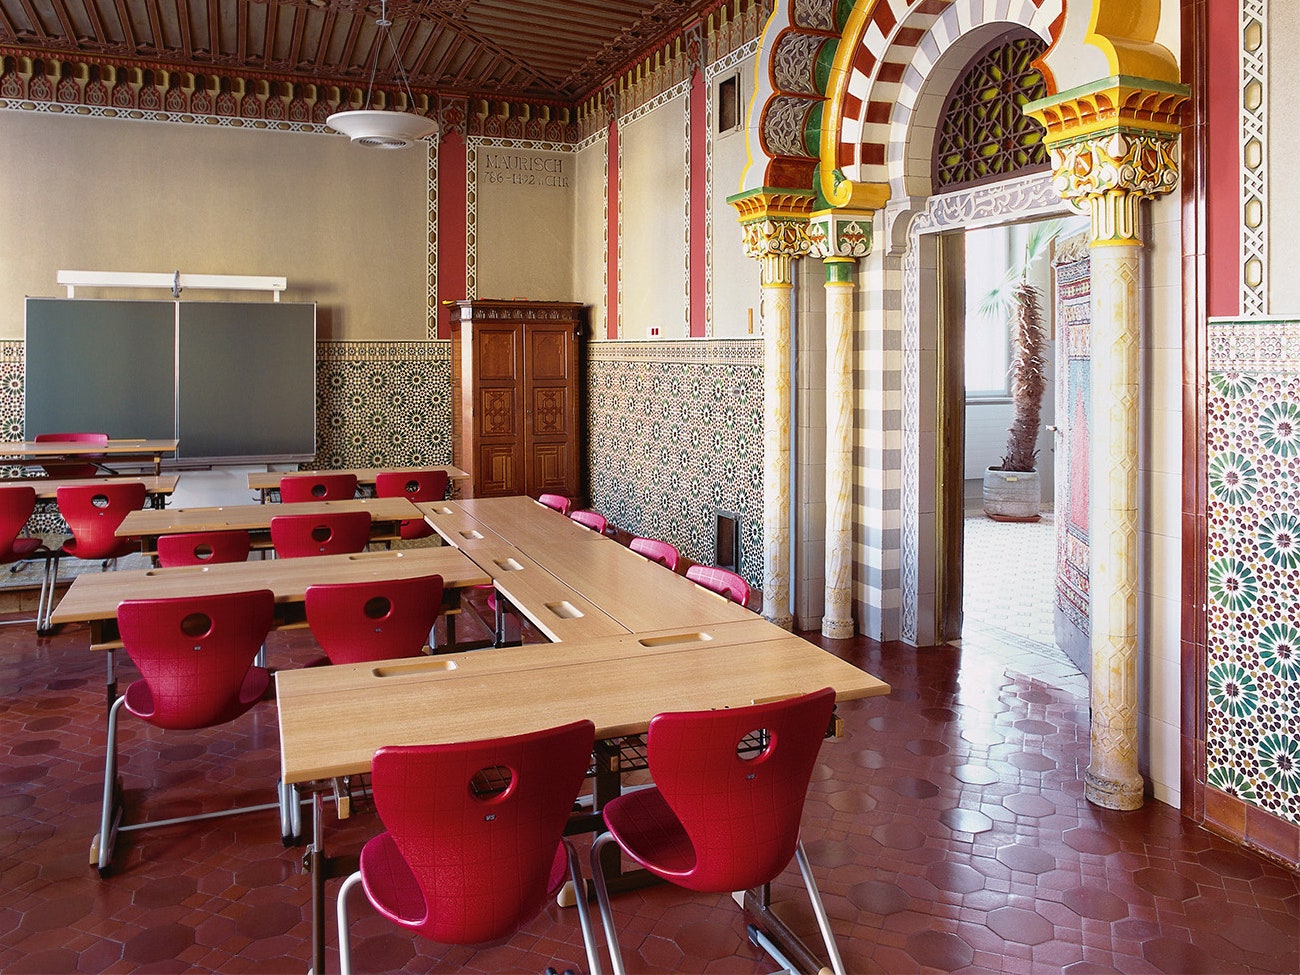 The ‘style classrooms’ of this Austrian school offer a lesson in historical decoration